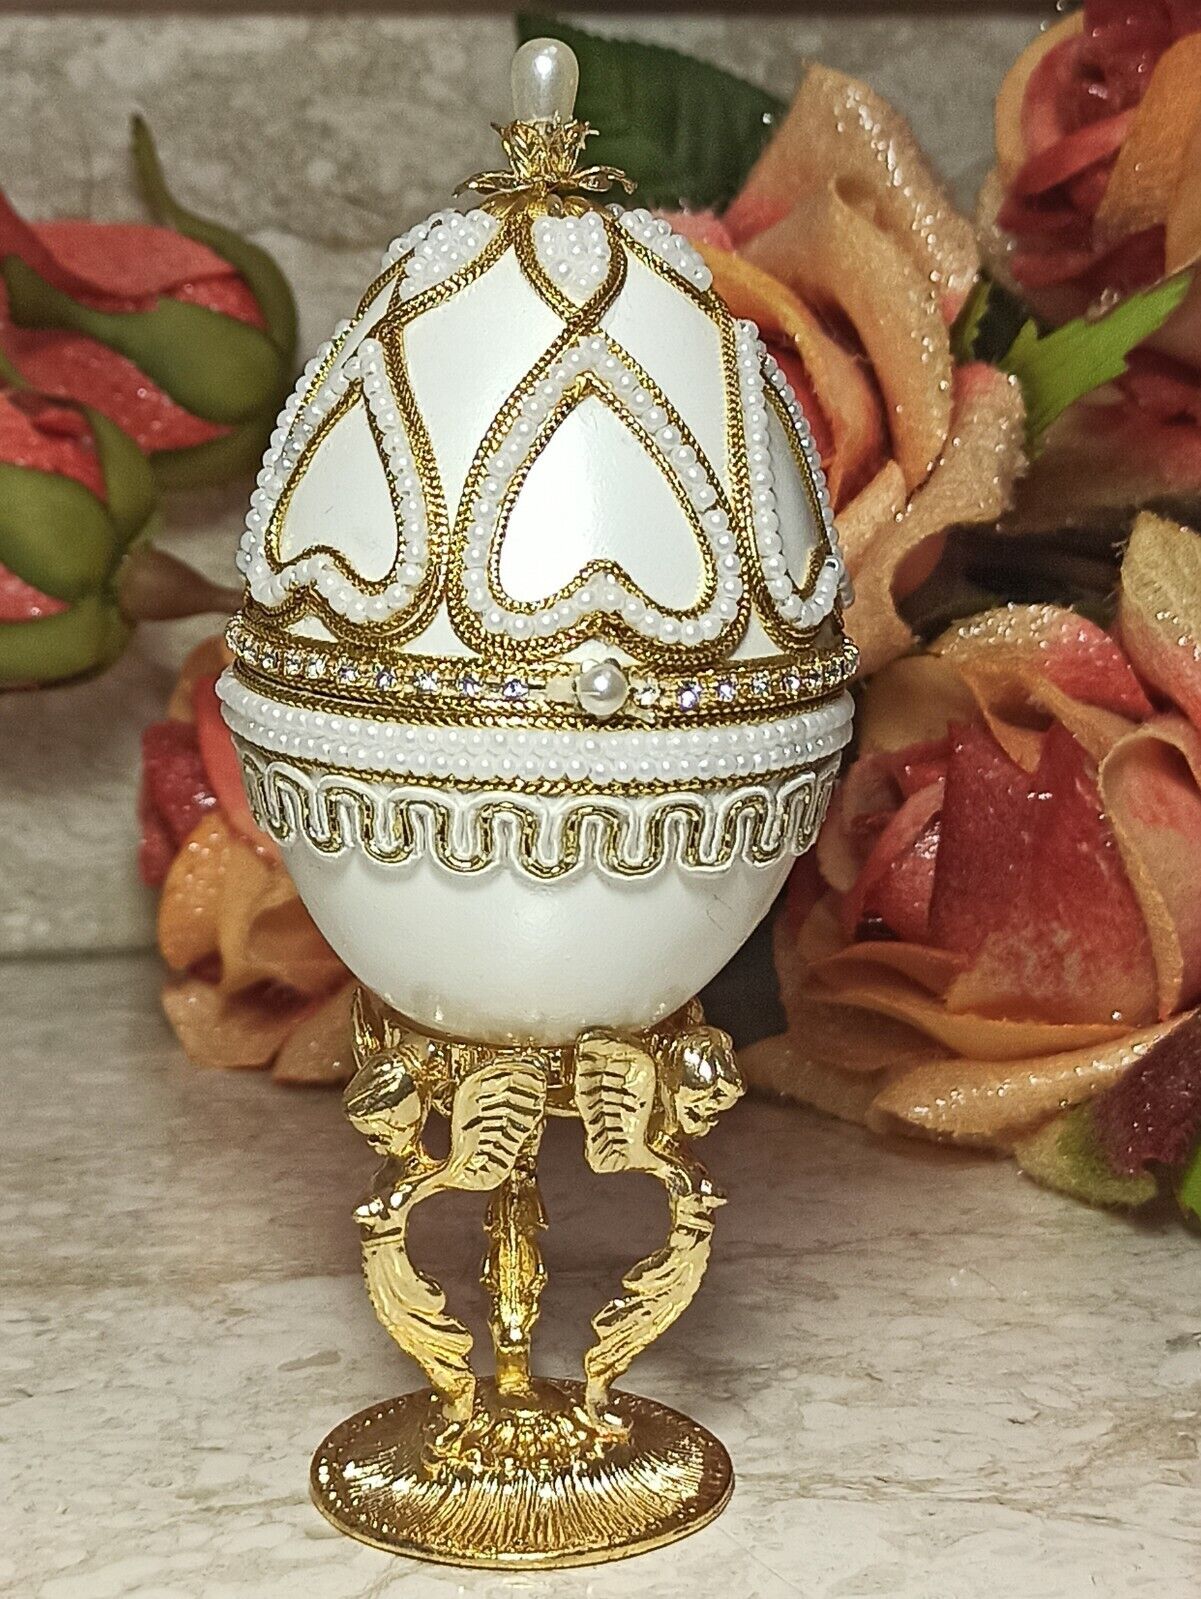 Guardian Angel Egg FABERGE Box Musical Trinket 24K GOLD HAND Decorated REAL Eggs